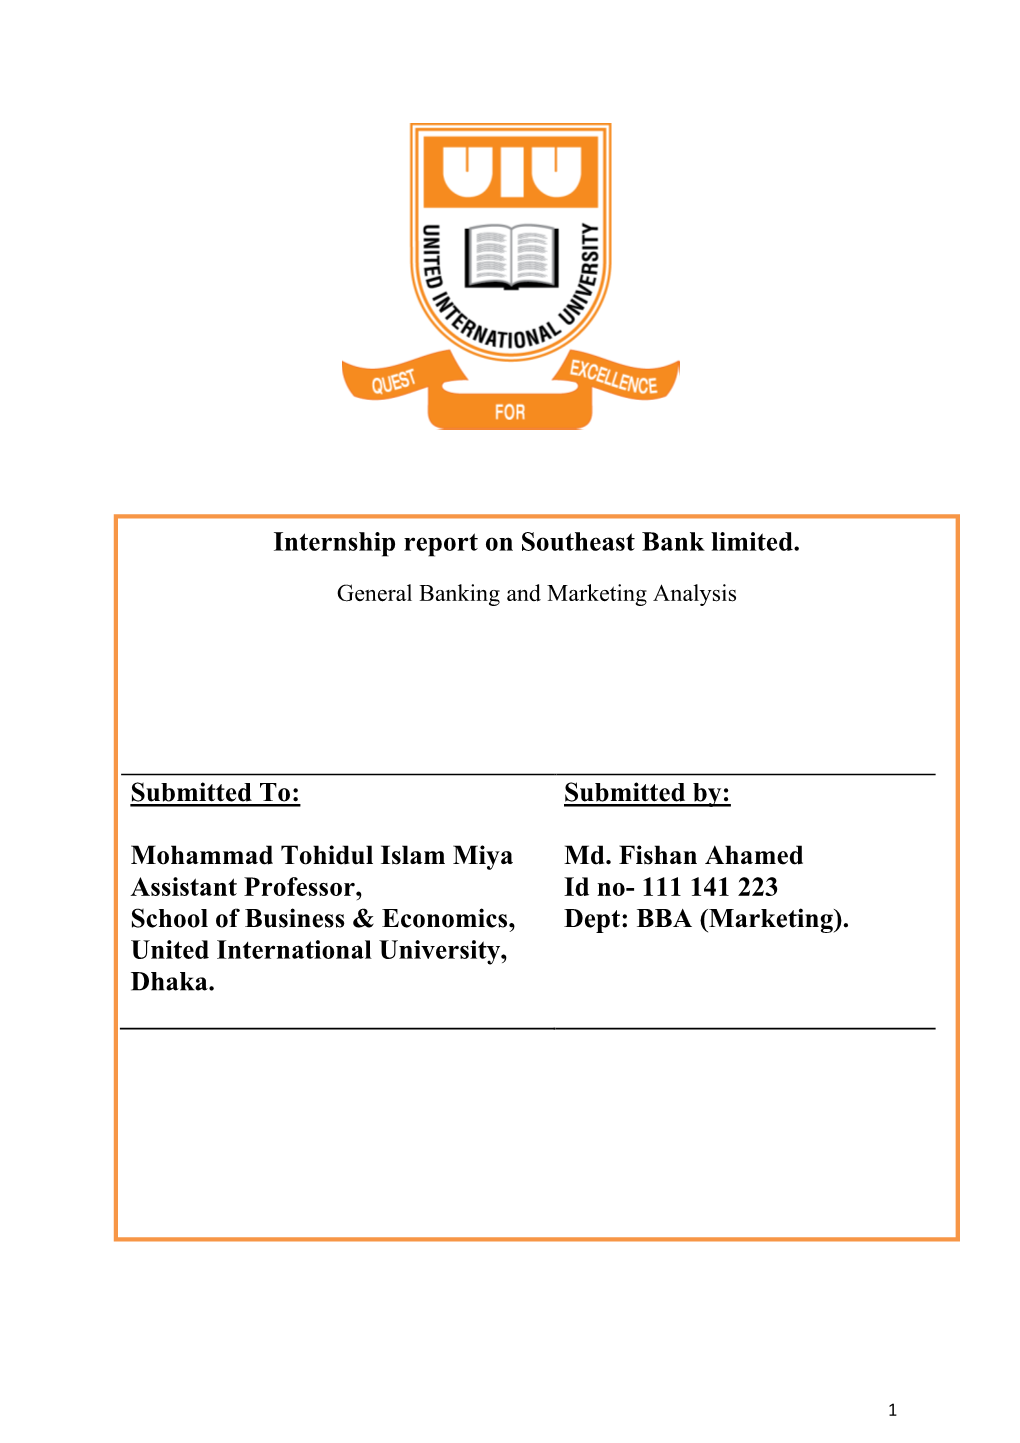 Internship Report on Southeast Bank Limited